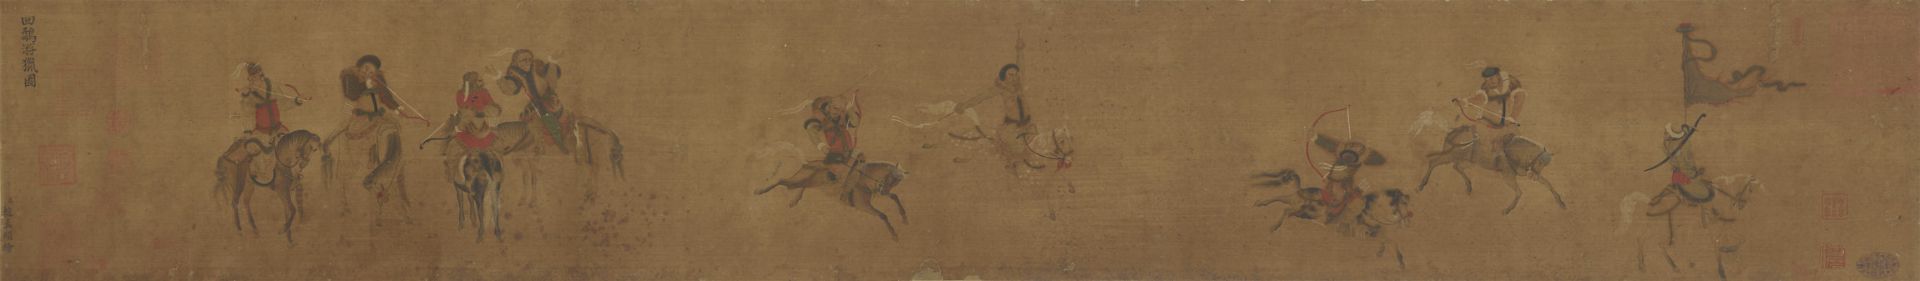 After Zhao Mengfu . Qing dynasty,  - Image 10 of 10